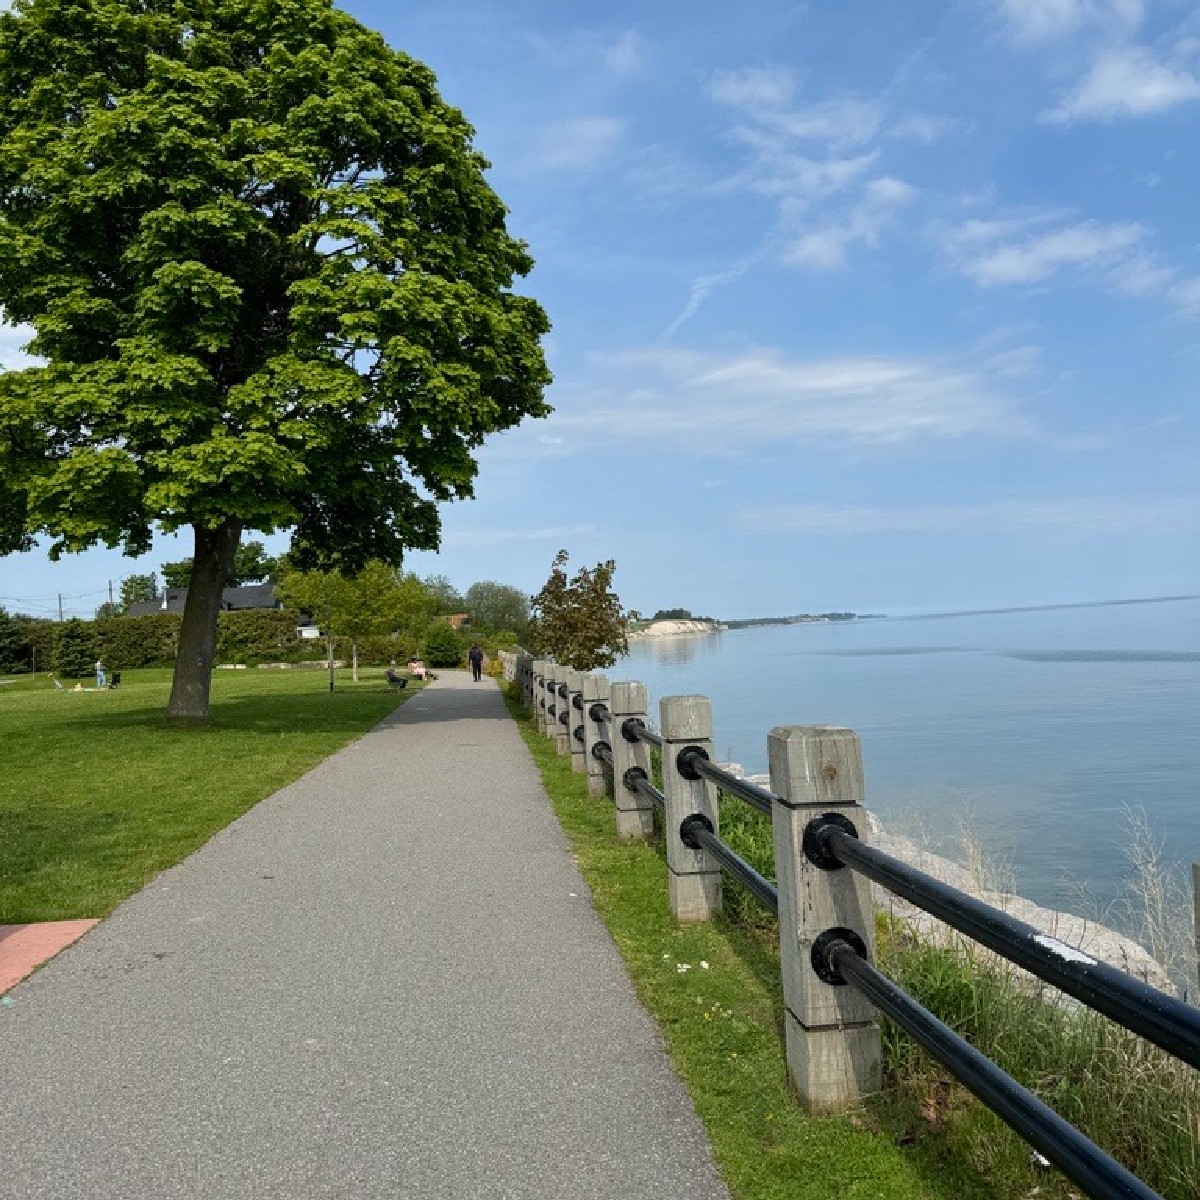 Clarington strives to create a #BarrierFreeClarington for all to enjoy, both inside AND outside! ☀️🌳 We are proud to offer accessible outdoor amenities, like wheelchair-accessible fishing spots and kilometres of accessible trails. 

Learn more: brnw.ch/21wKlzn ⬅️